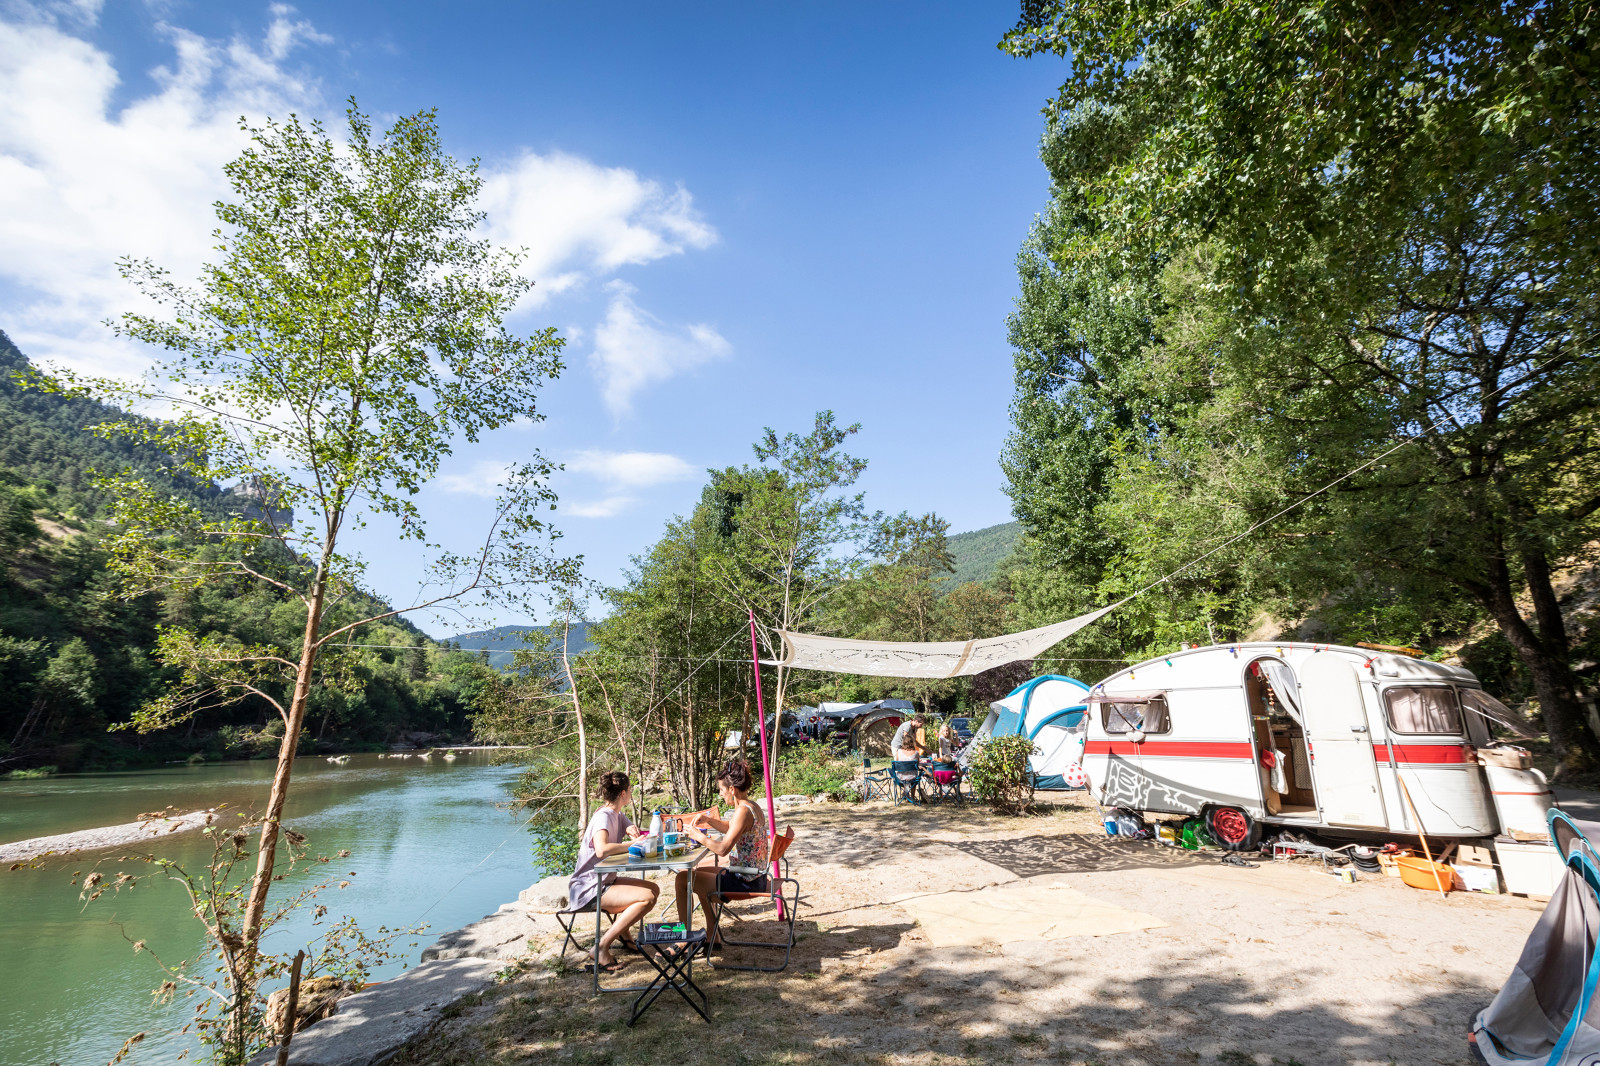 Emplacement - Emplacement Camping Confort - Camping Huttopia Gorges du Tarn